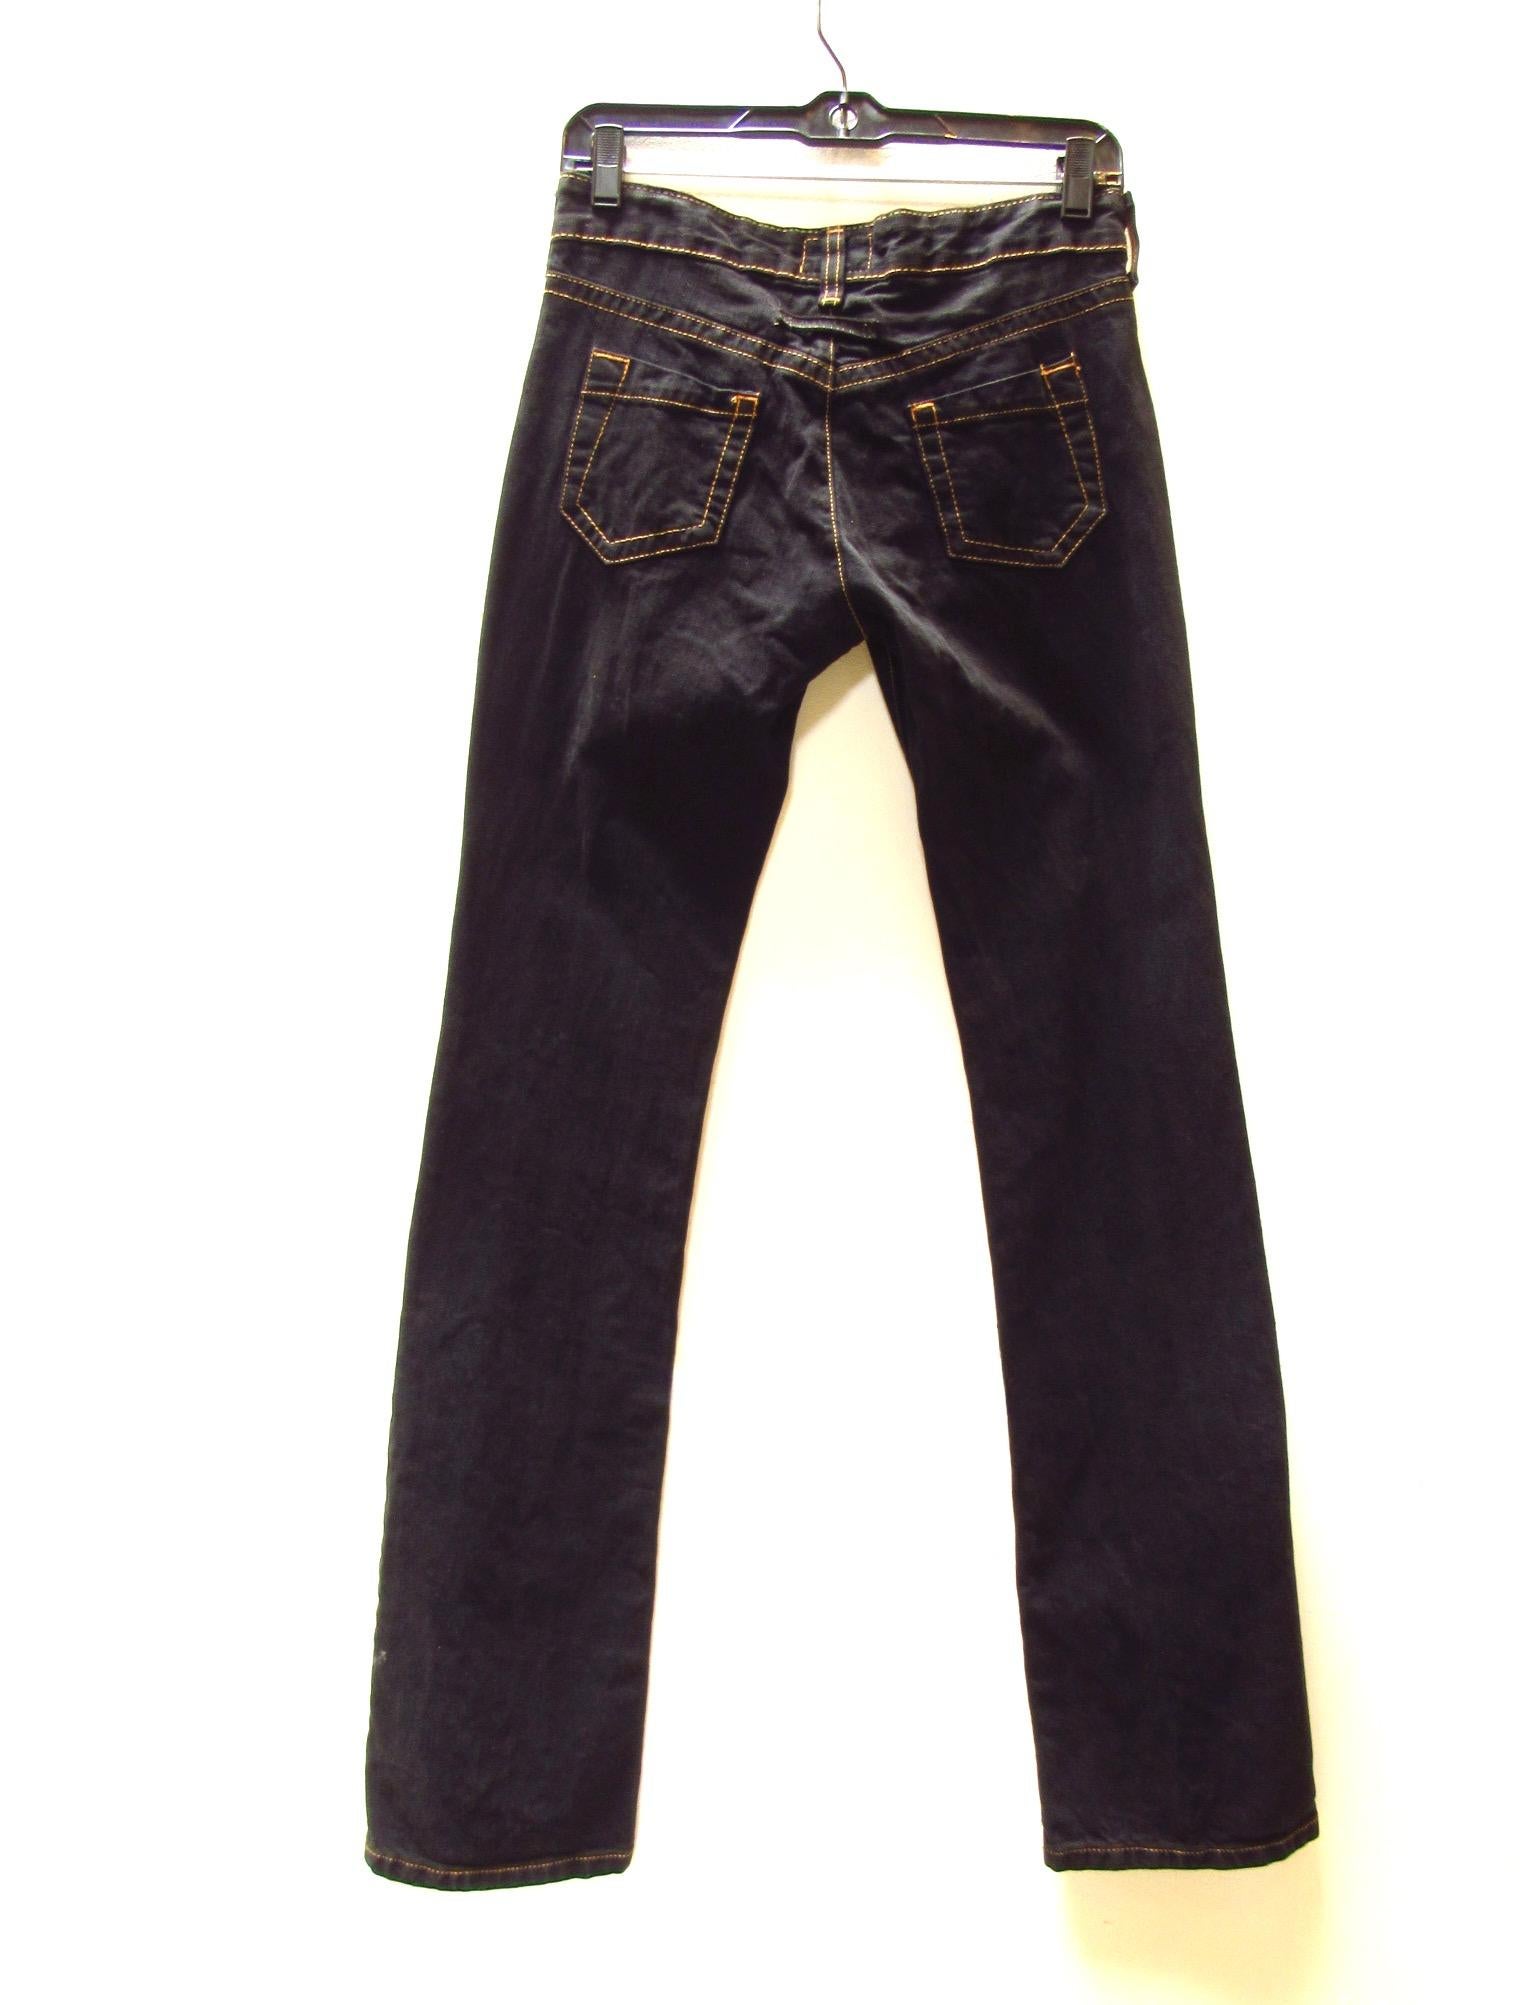 Vintage dark wash denim from Jean Paul Gaultier with distinctive orange contrast stitching. Inside waist is lined with cotton emblazoned with cheeky skull art. 